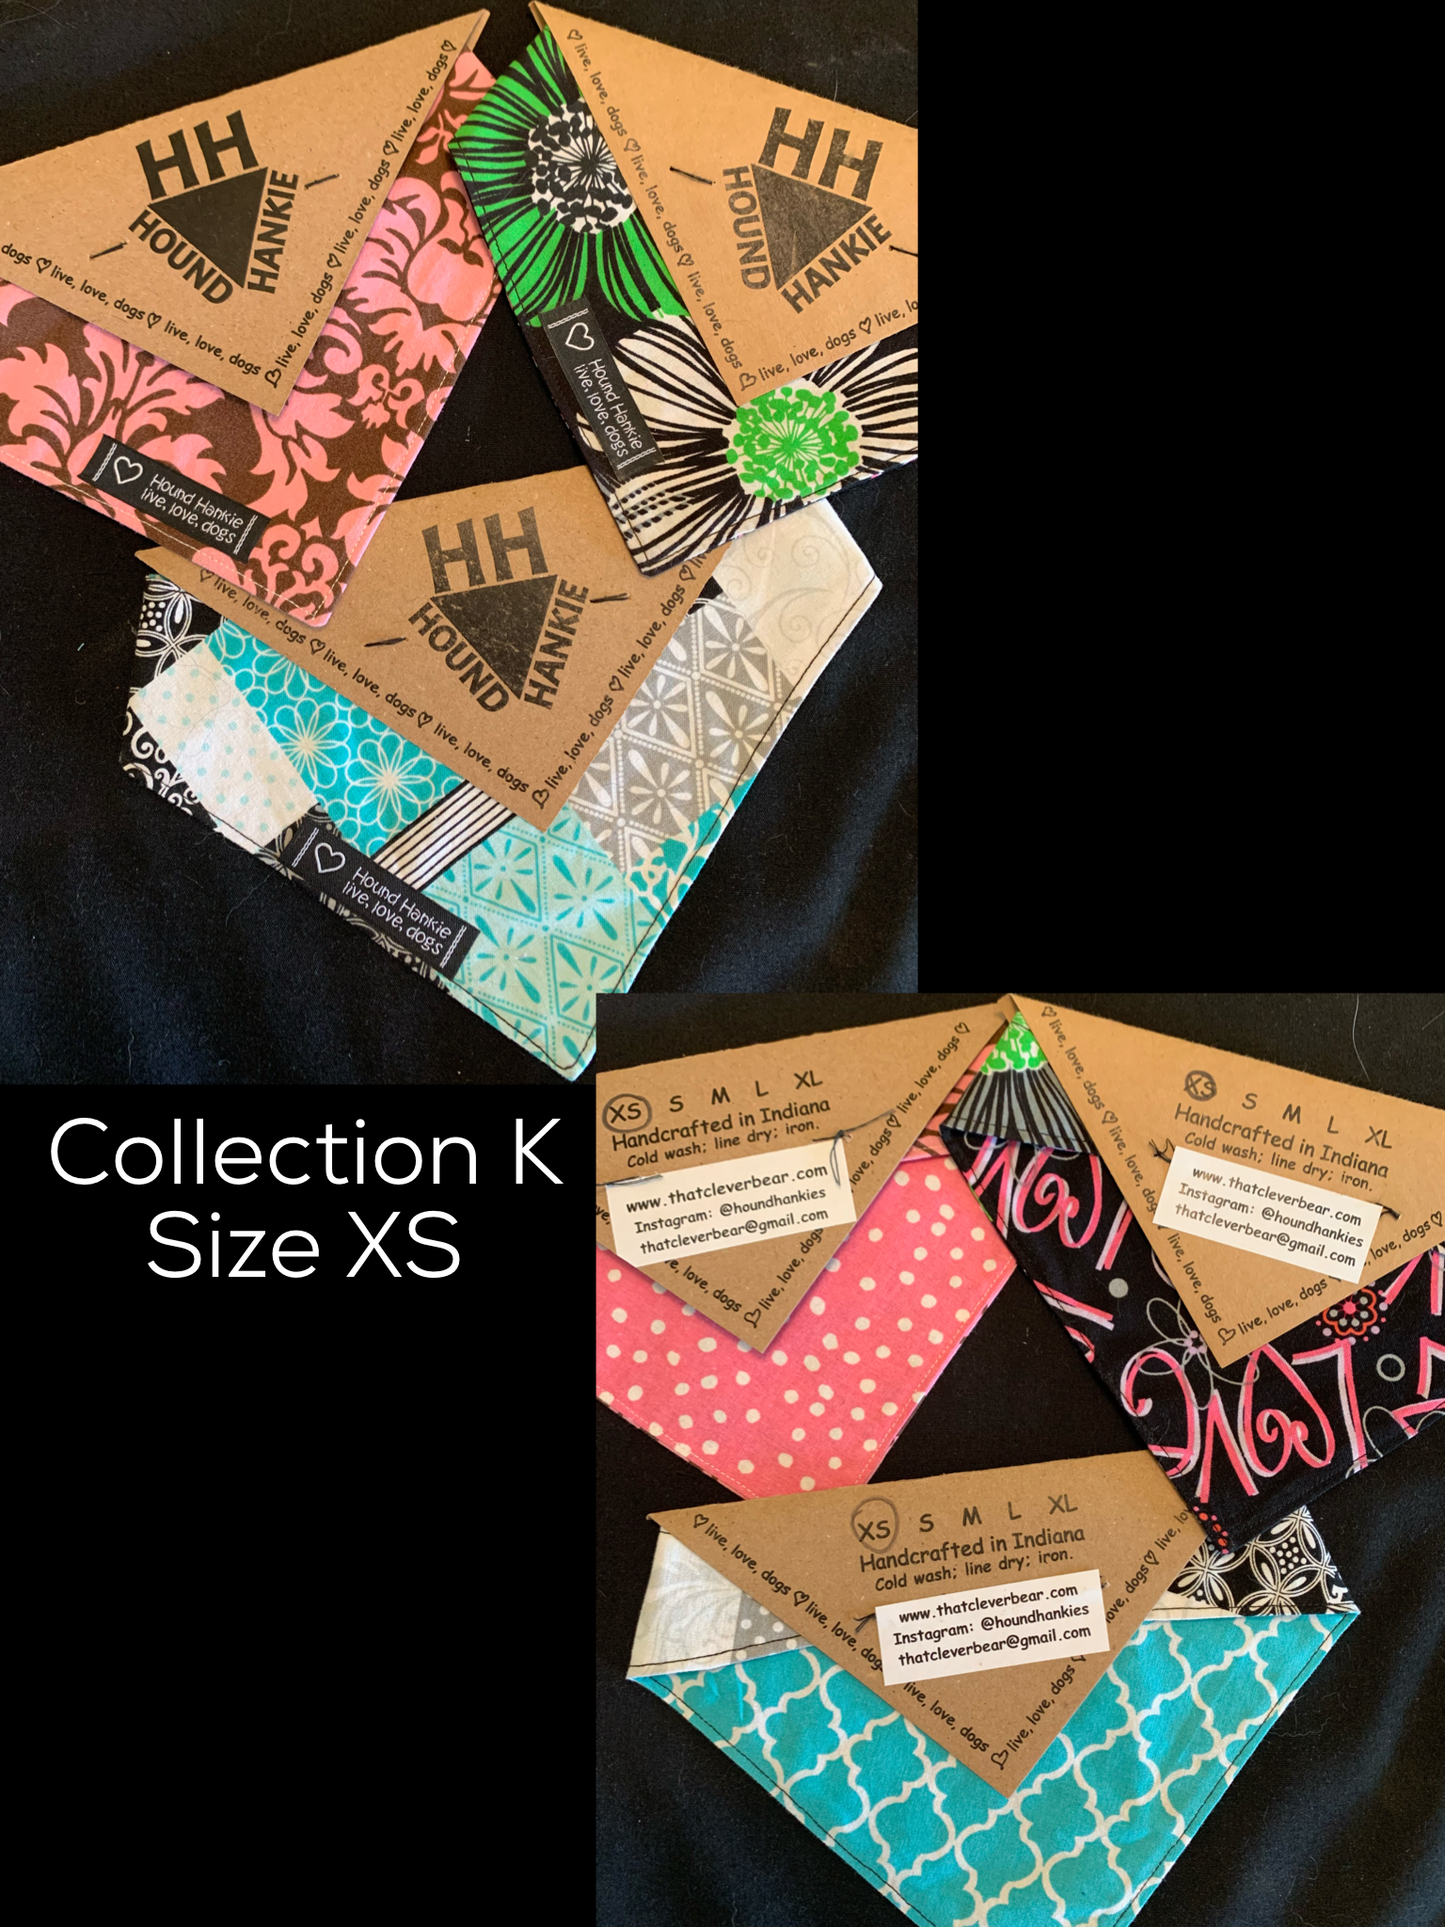 Collection K Size XS